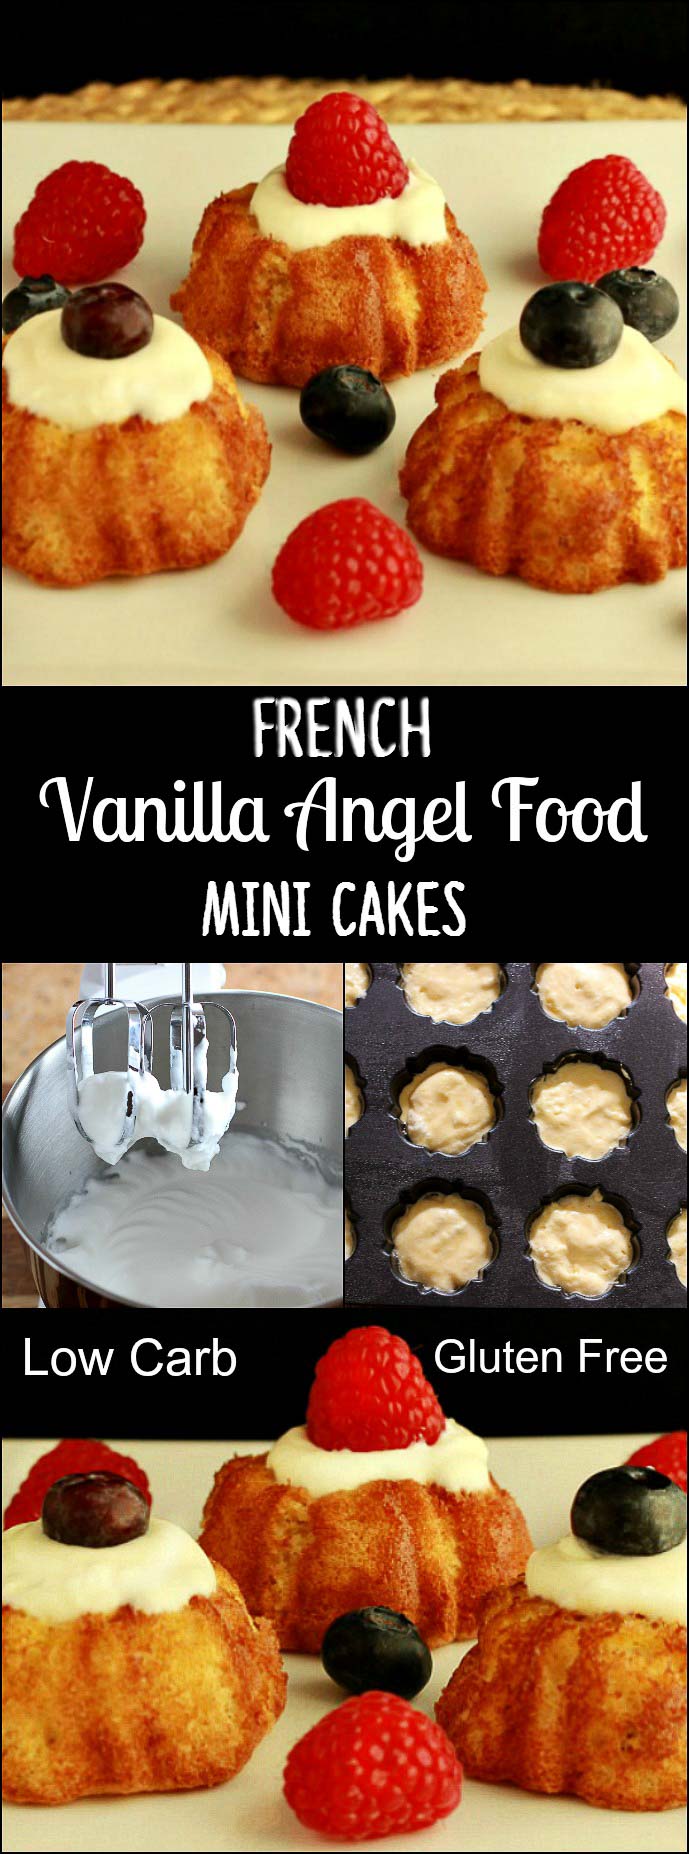 French Vanilla Angel Food Cake, grain free- Low carb, paleo and gluten free